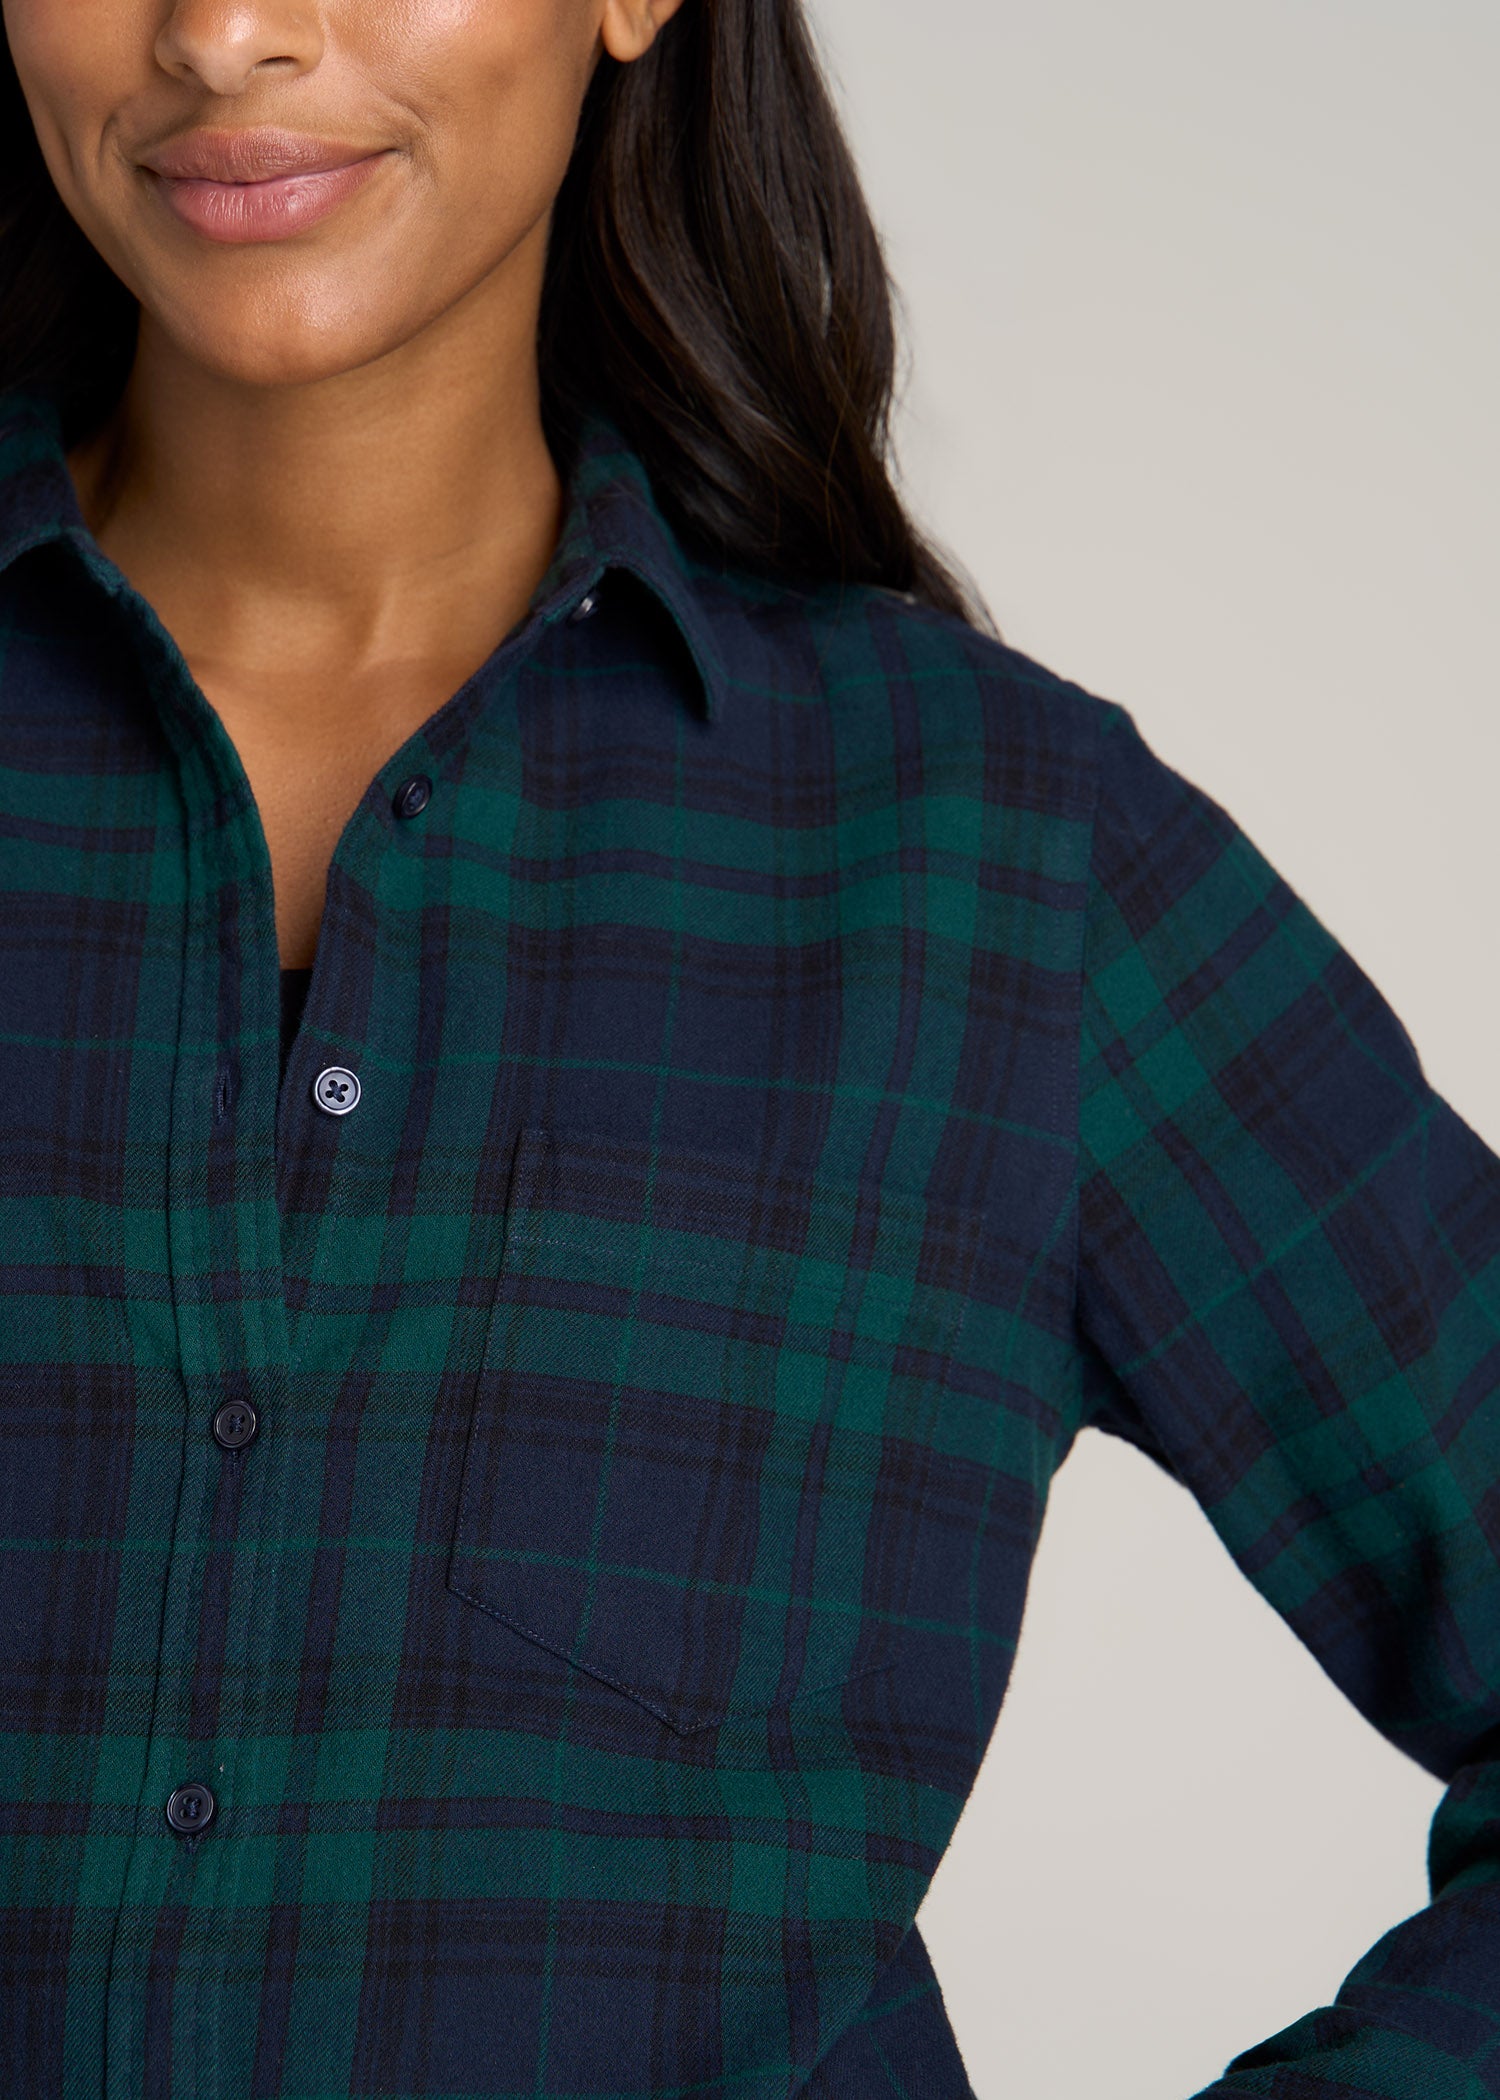 Flannel Button-Up Shirt for Tall Women in Mauve and Blue Plaid